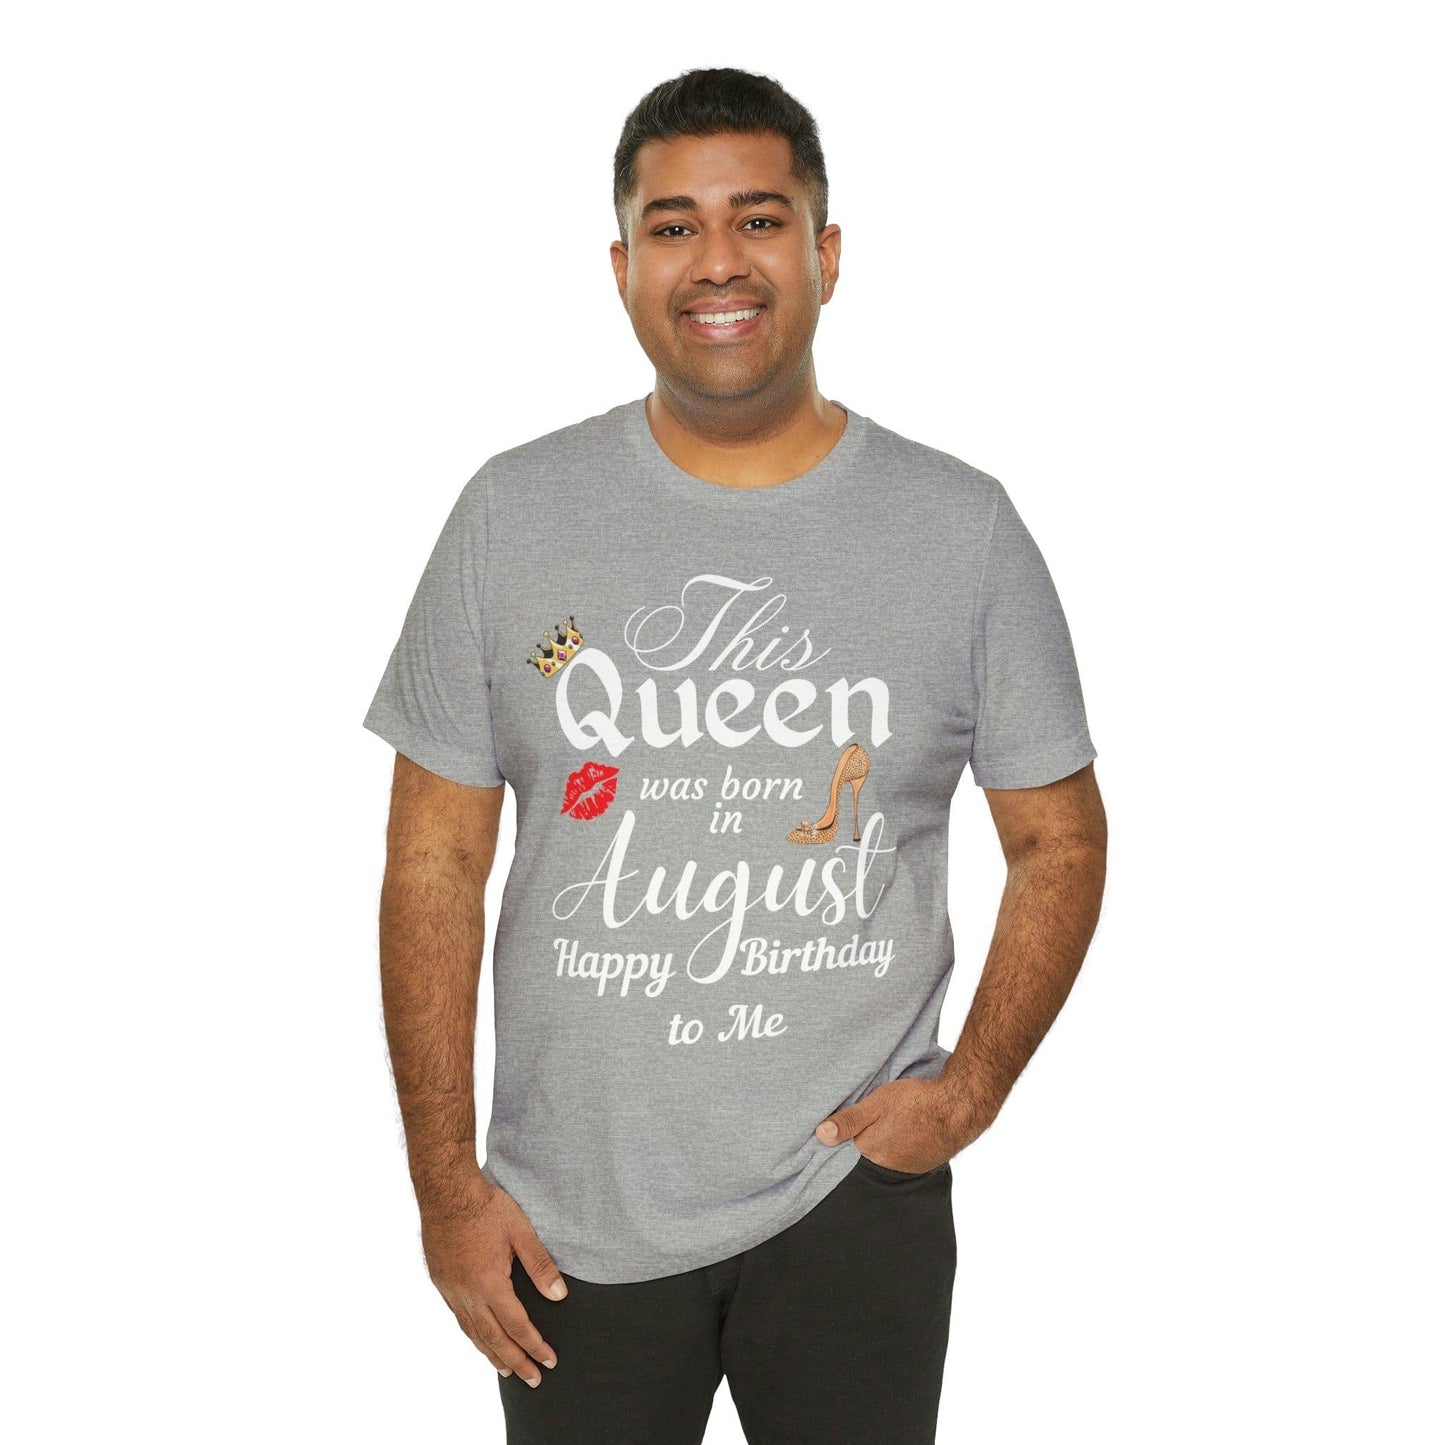 Birthday Queen Shirt, Gift for birthday, This Queen was born in August shirt, Funny Queen shirt, funny Birthday shirt, birthday gift - Giftsmojo